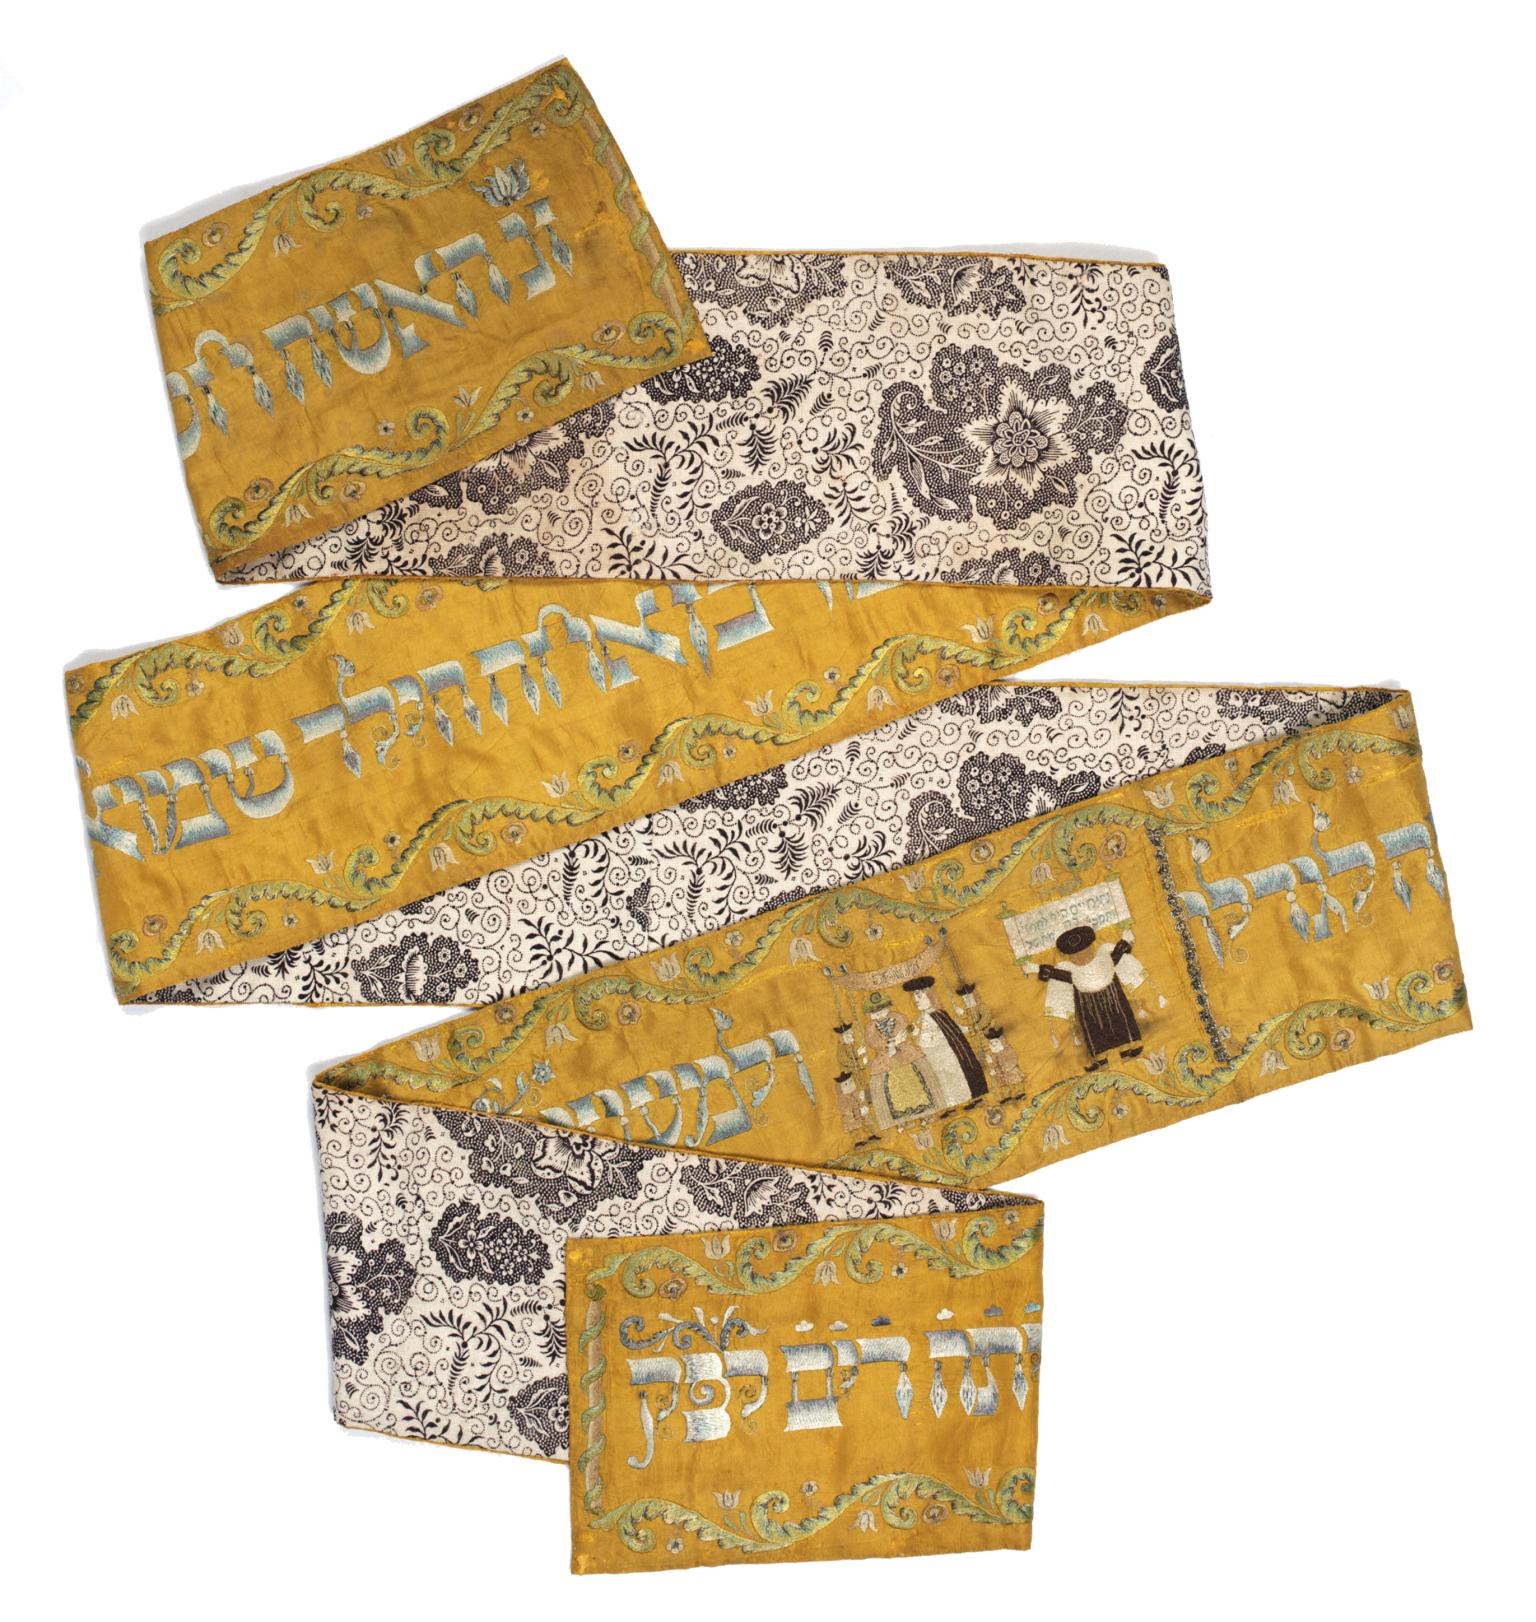 Long rectangular cloth folded in several places, with floral design on one side and Hebrew text on the other side, with image of person reading from the Torah and couple under a wedding canopy. 